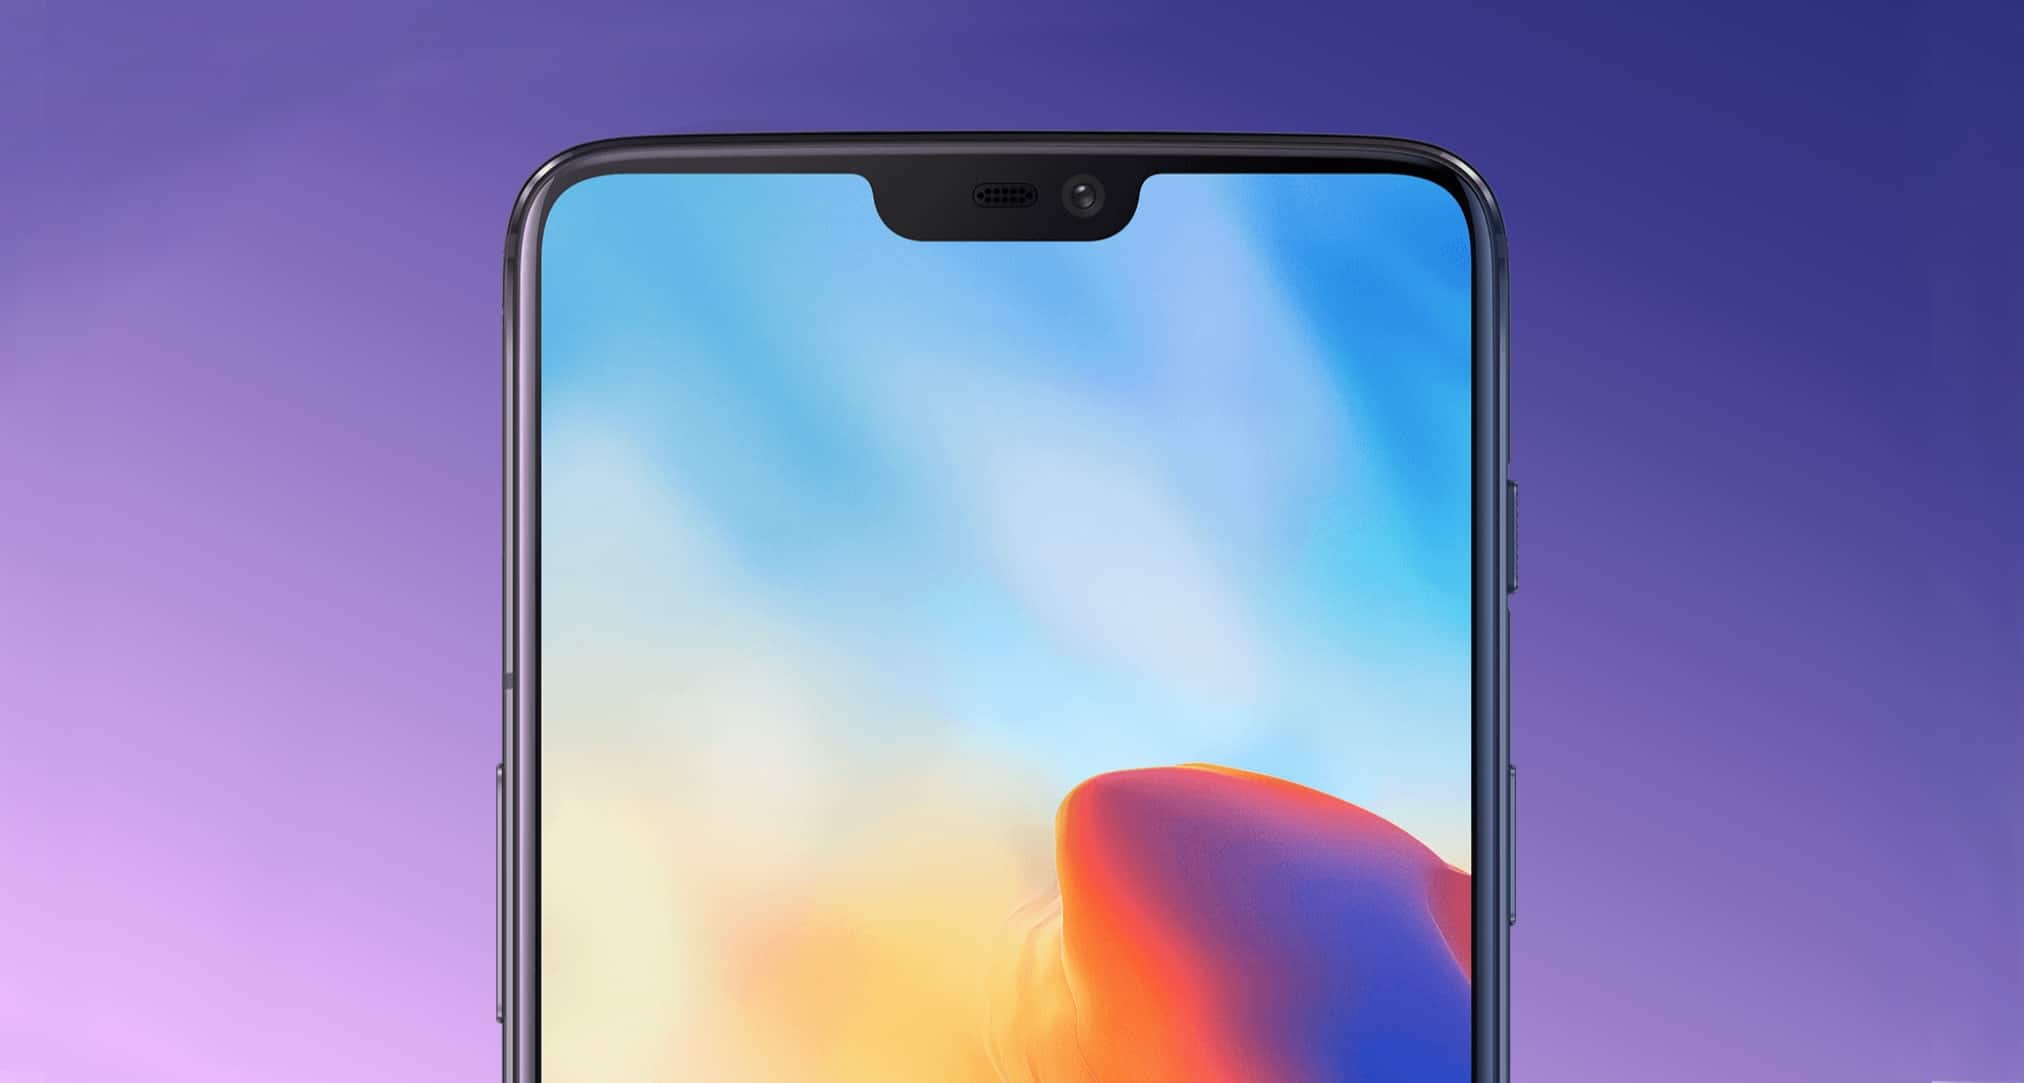 Although the OnePlus 6 has a screen cutout like the iPhone X, it's not a copycat.